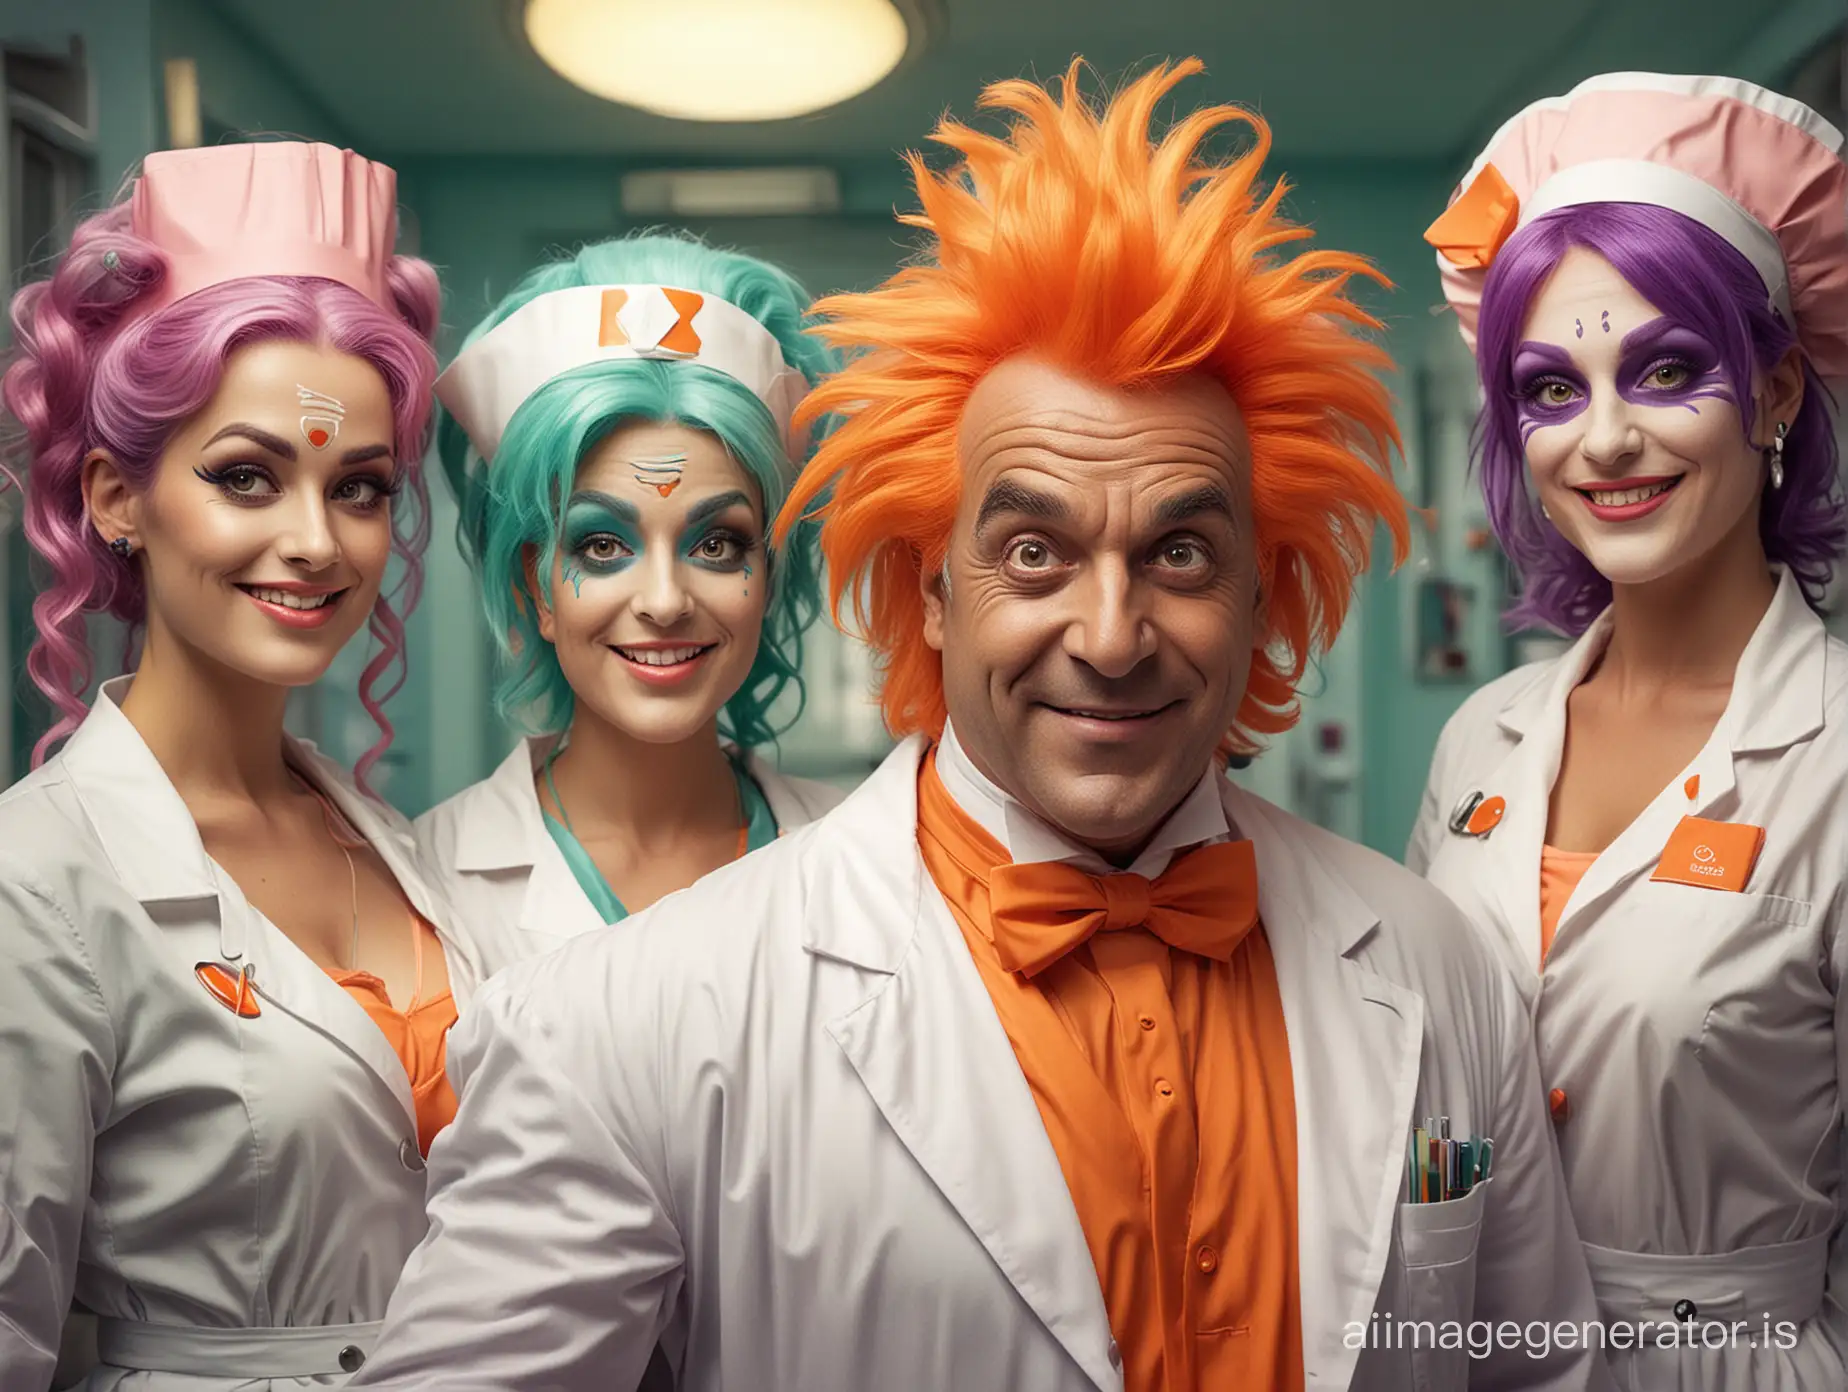 a flamboyant doctor with oompa loompas as nurses. Weird and colorful fantasy world.